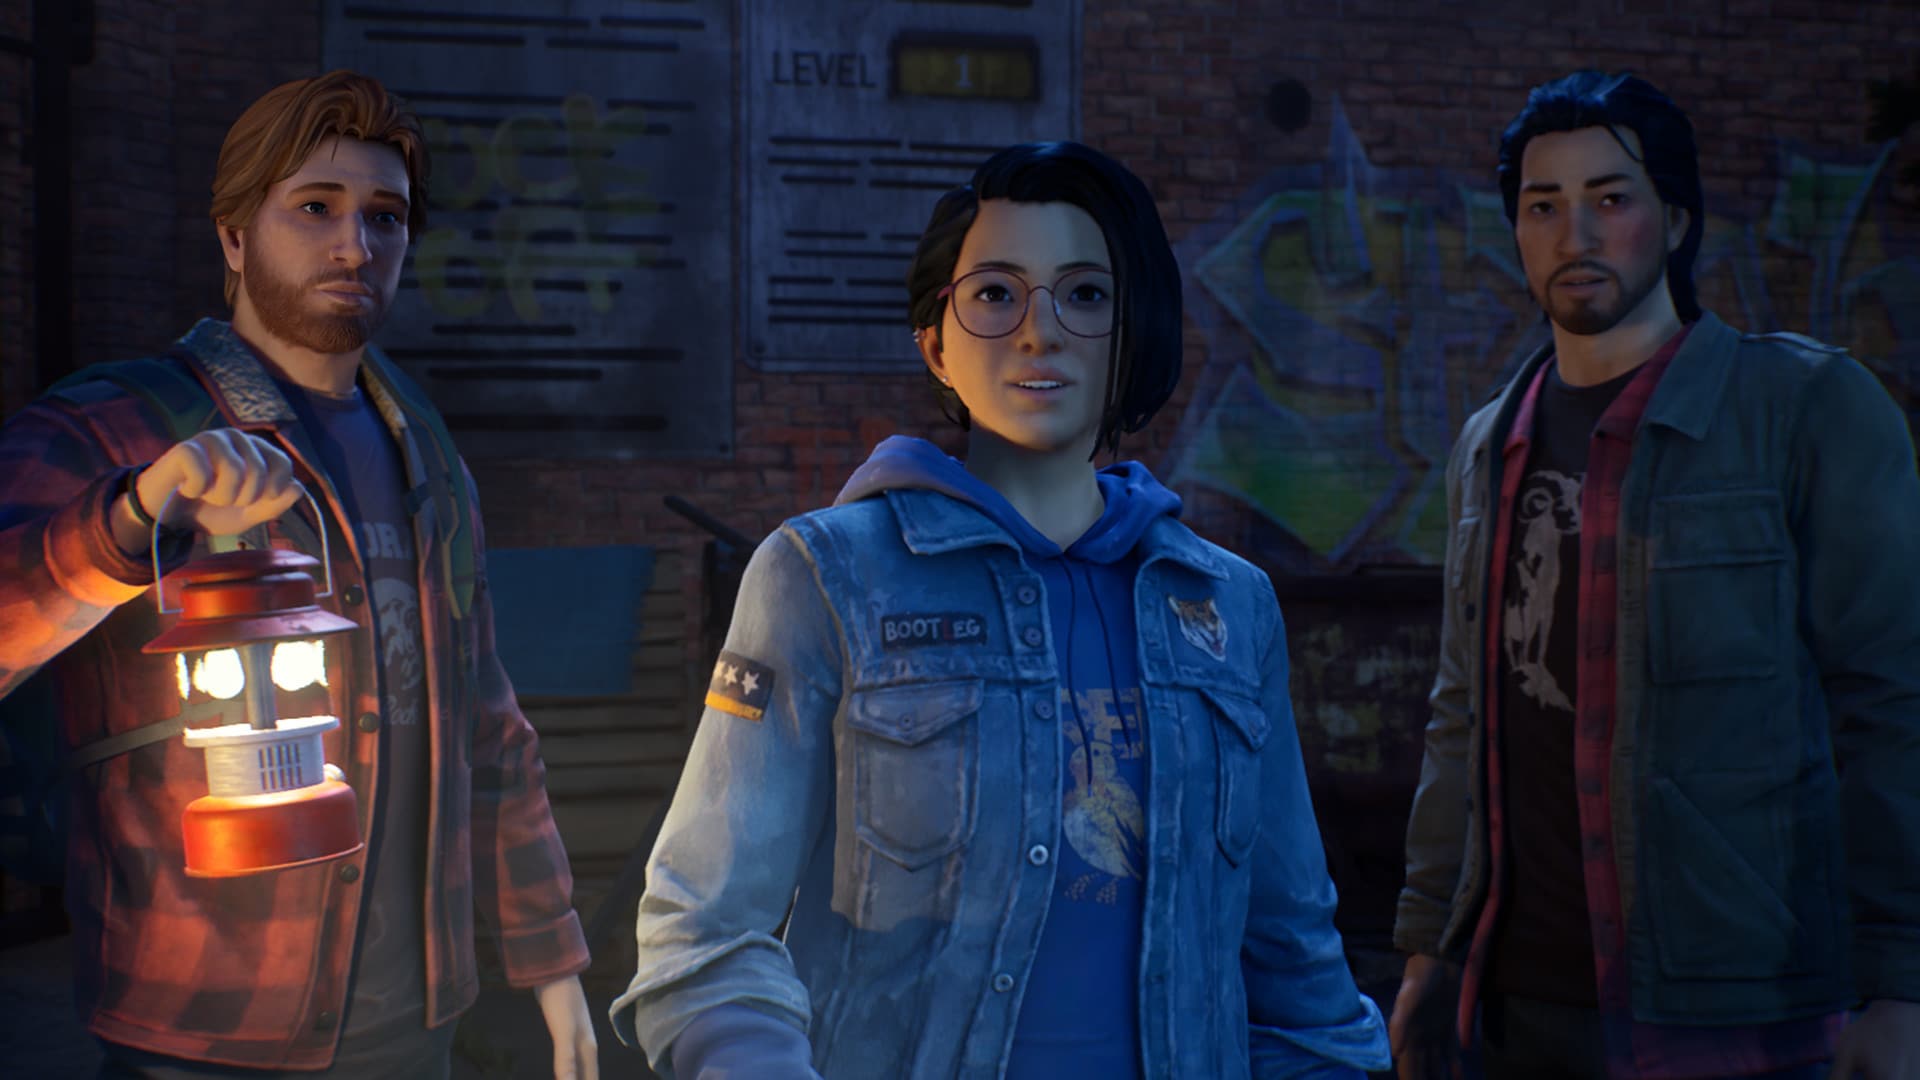 Life is Strange: True Colors Deluxe Edition